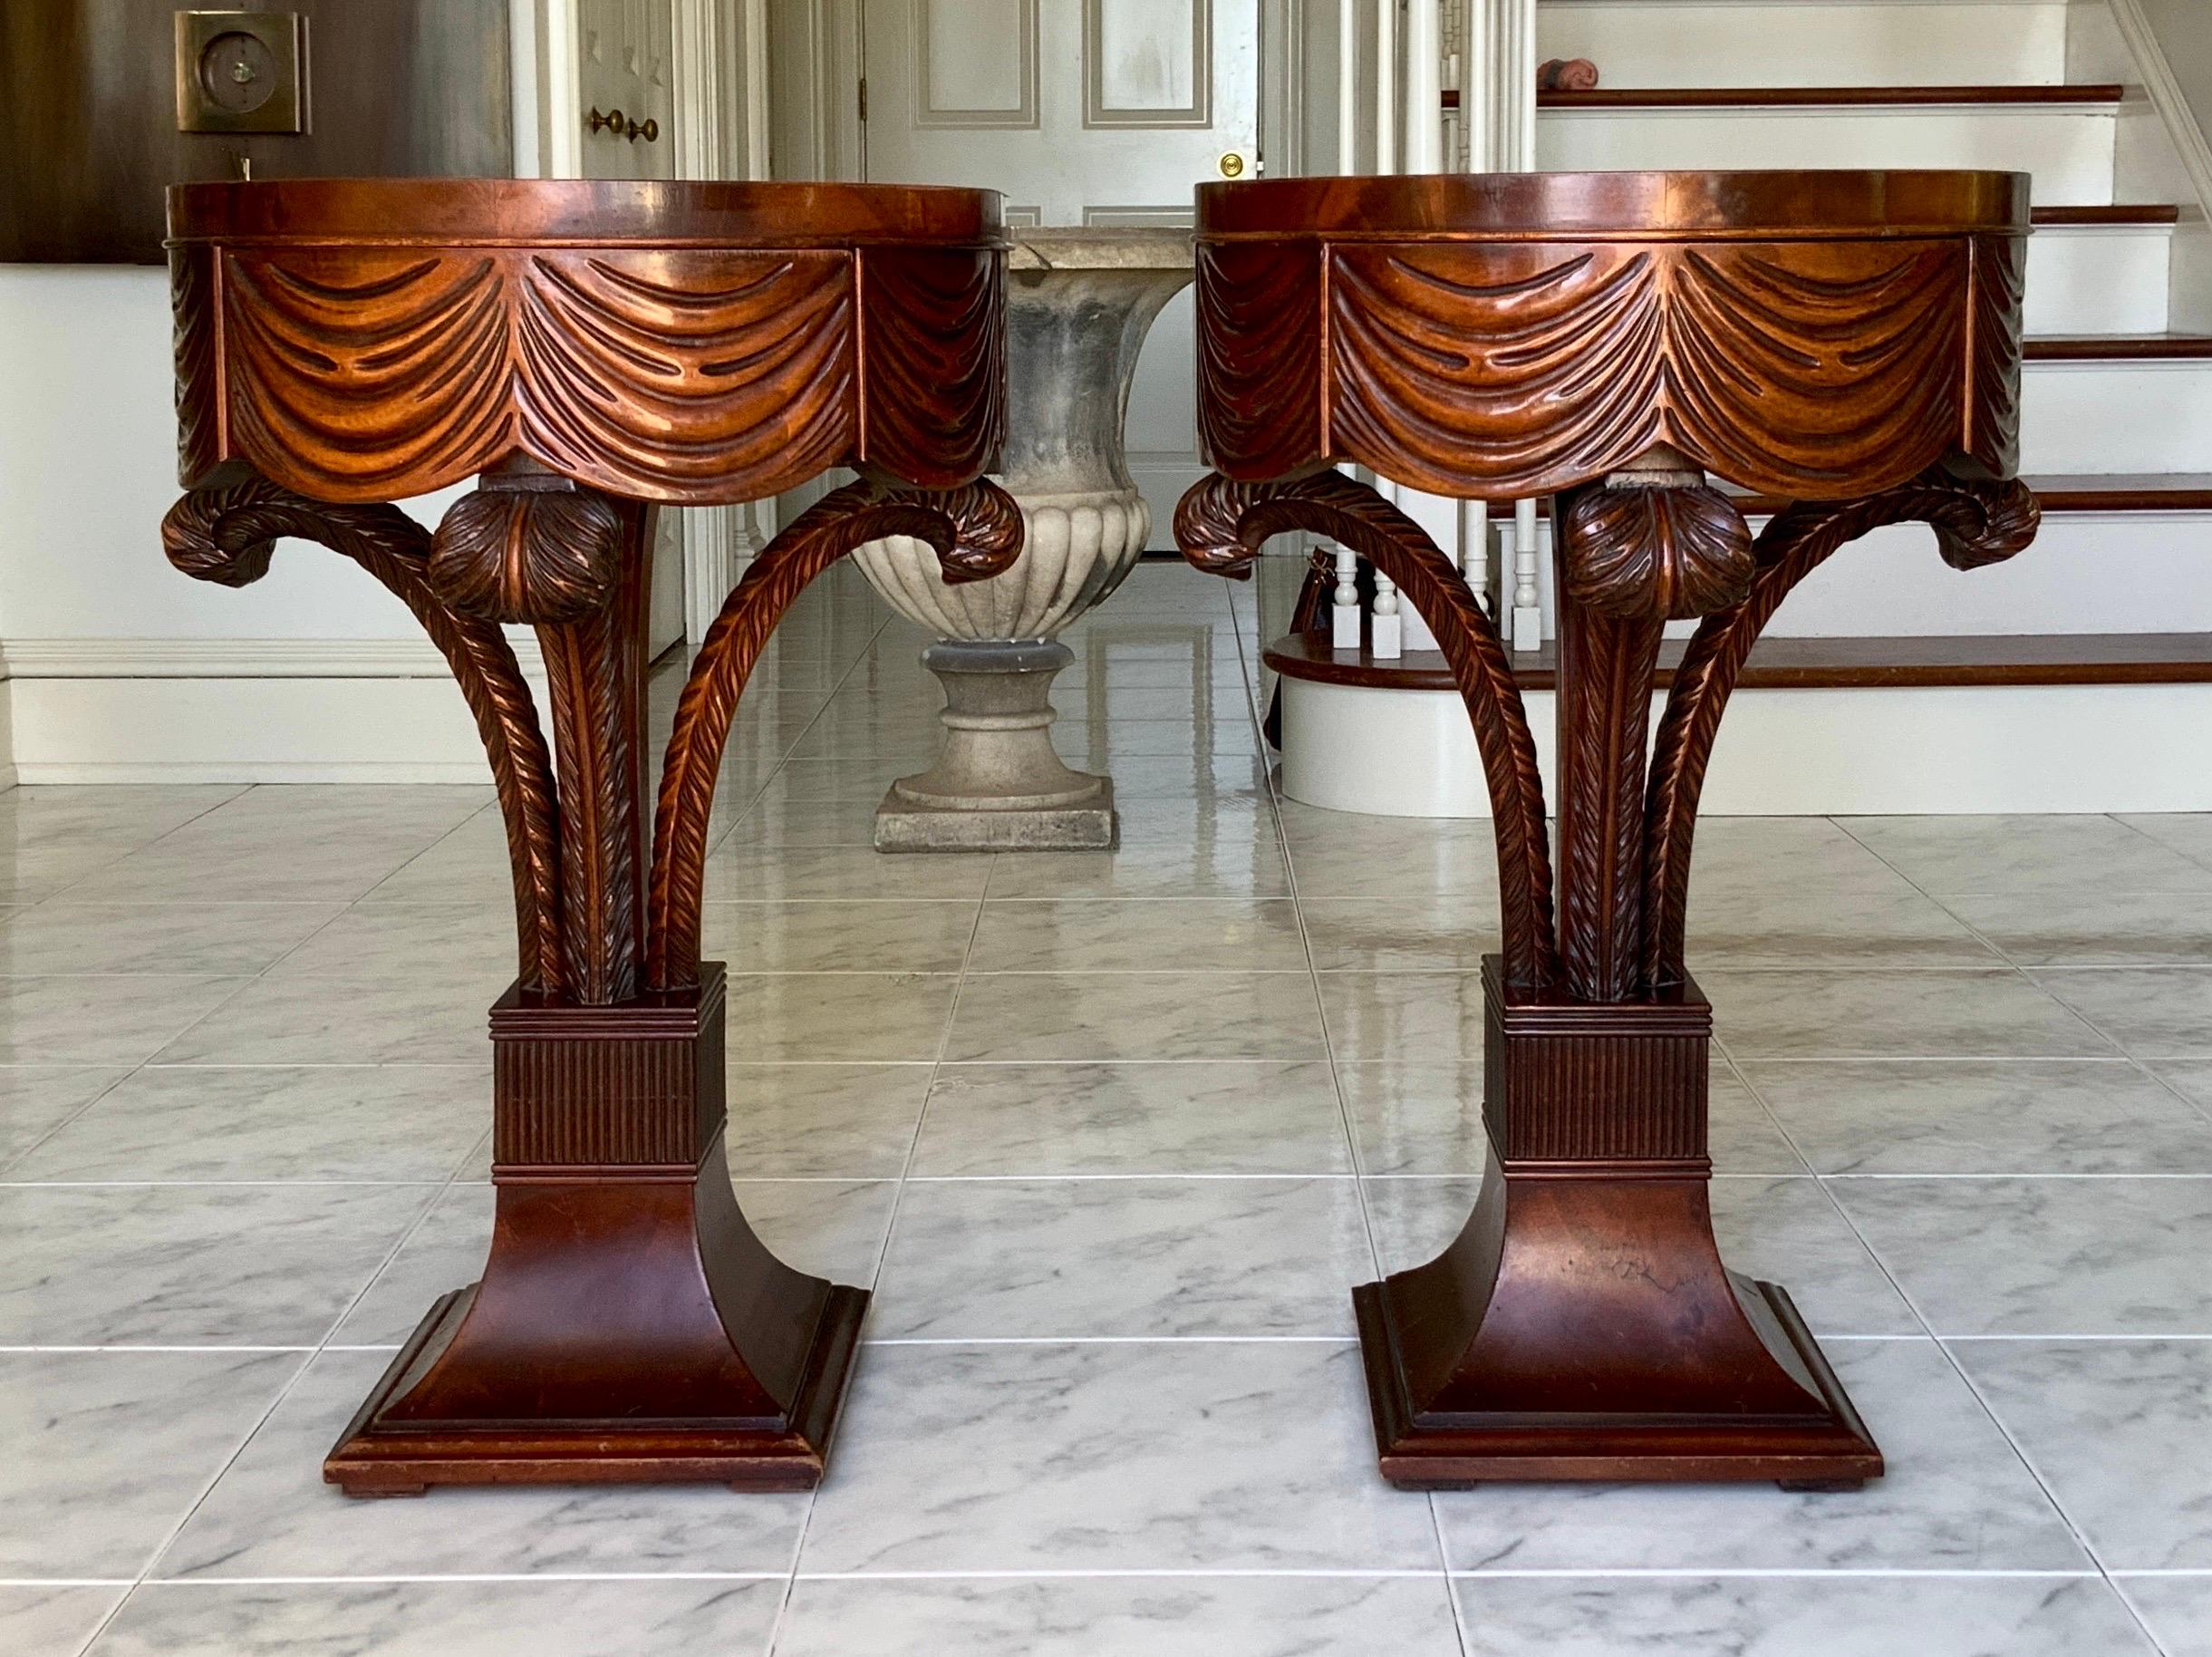 A gorgeous pair of 1940s Grosfeld House plume side tables.
Fabulous set of carved mahogany wood plumes holding a carved draped top with a hidden drawer. Hollywood Regency glamour with beautiful detailed workmanship.